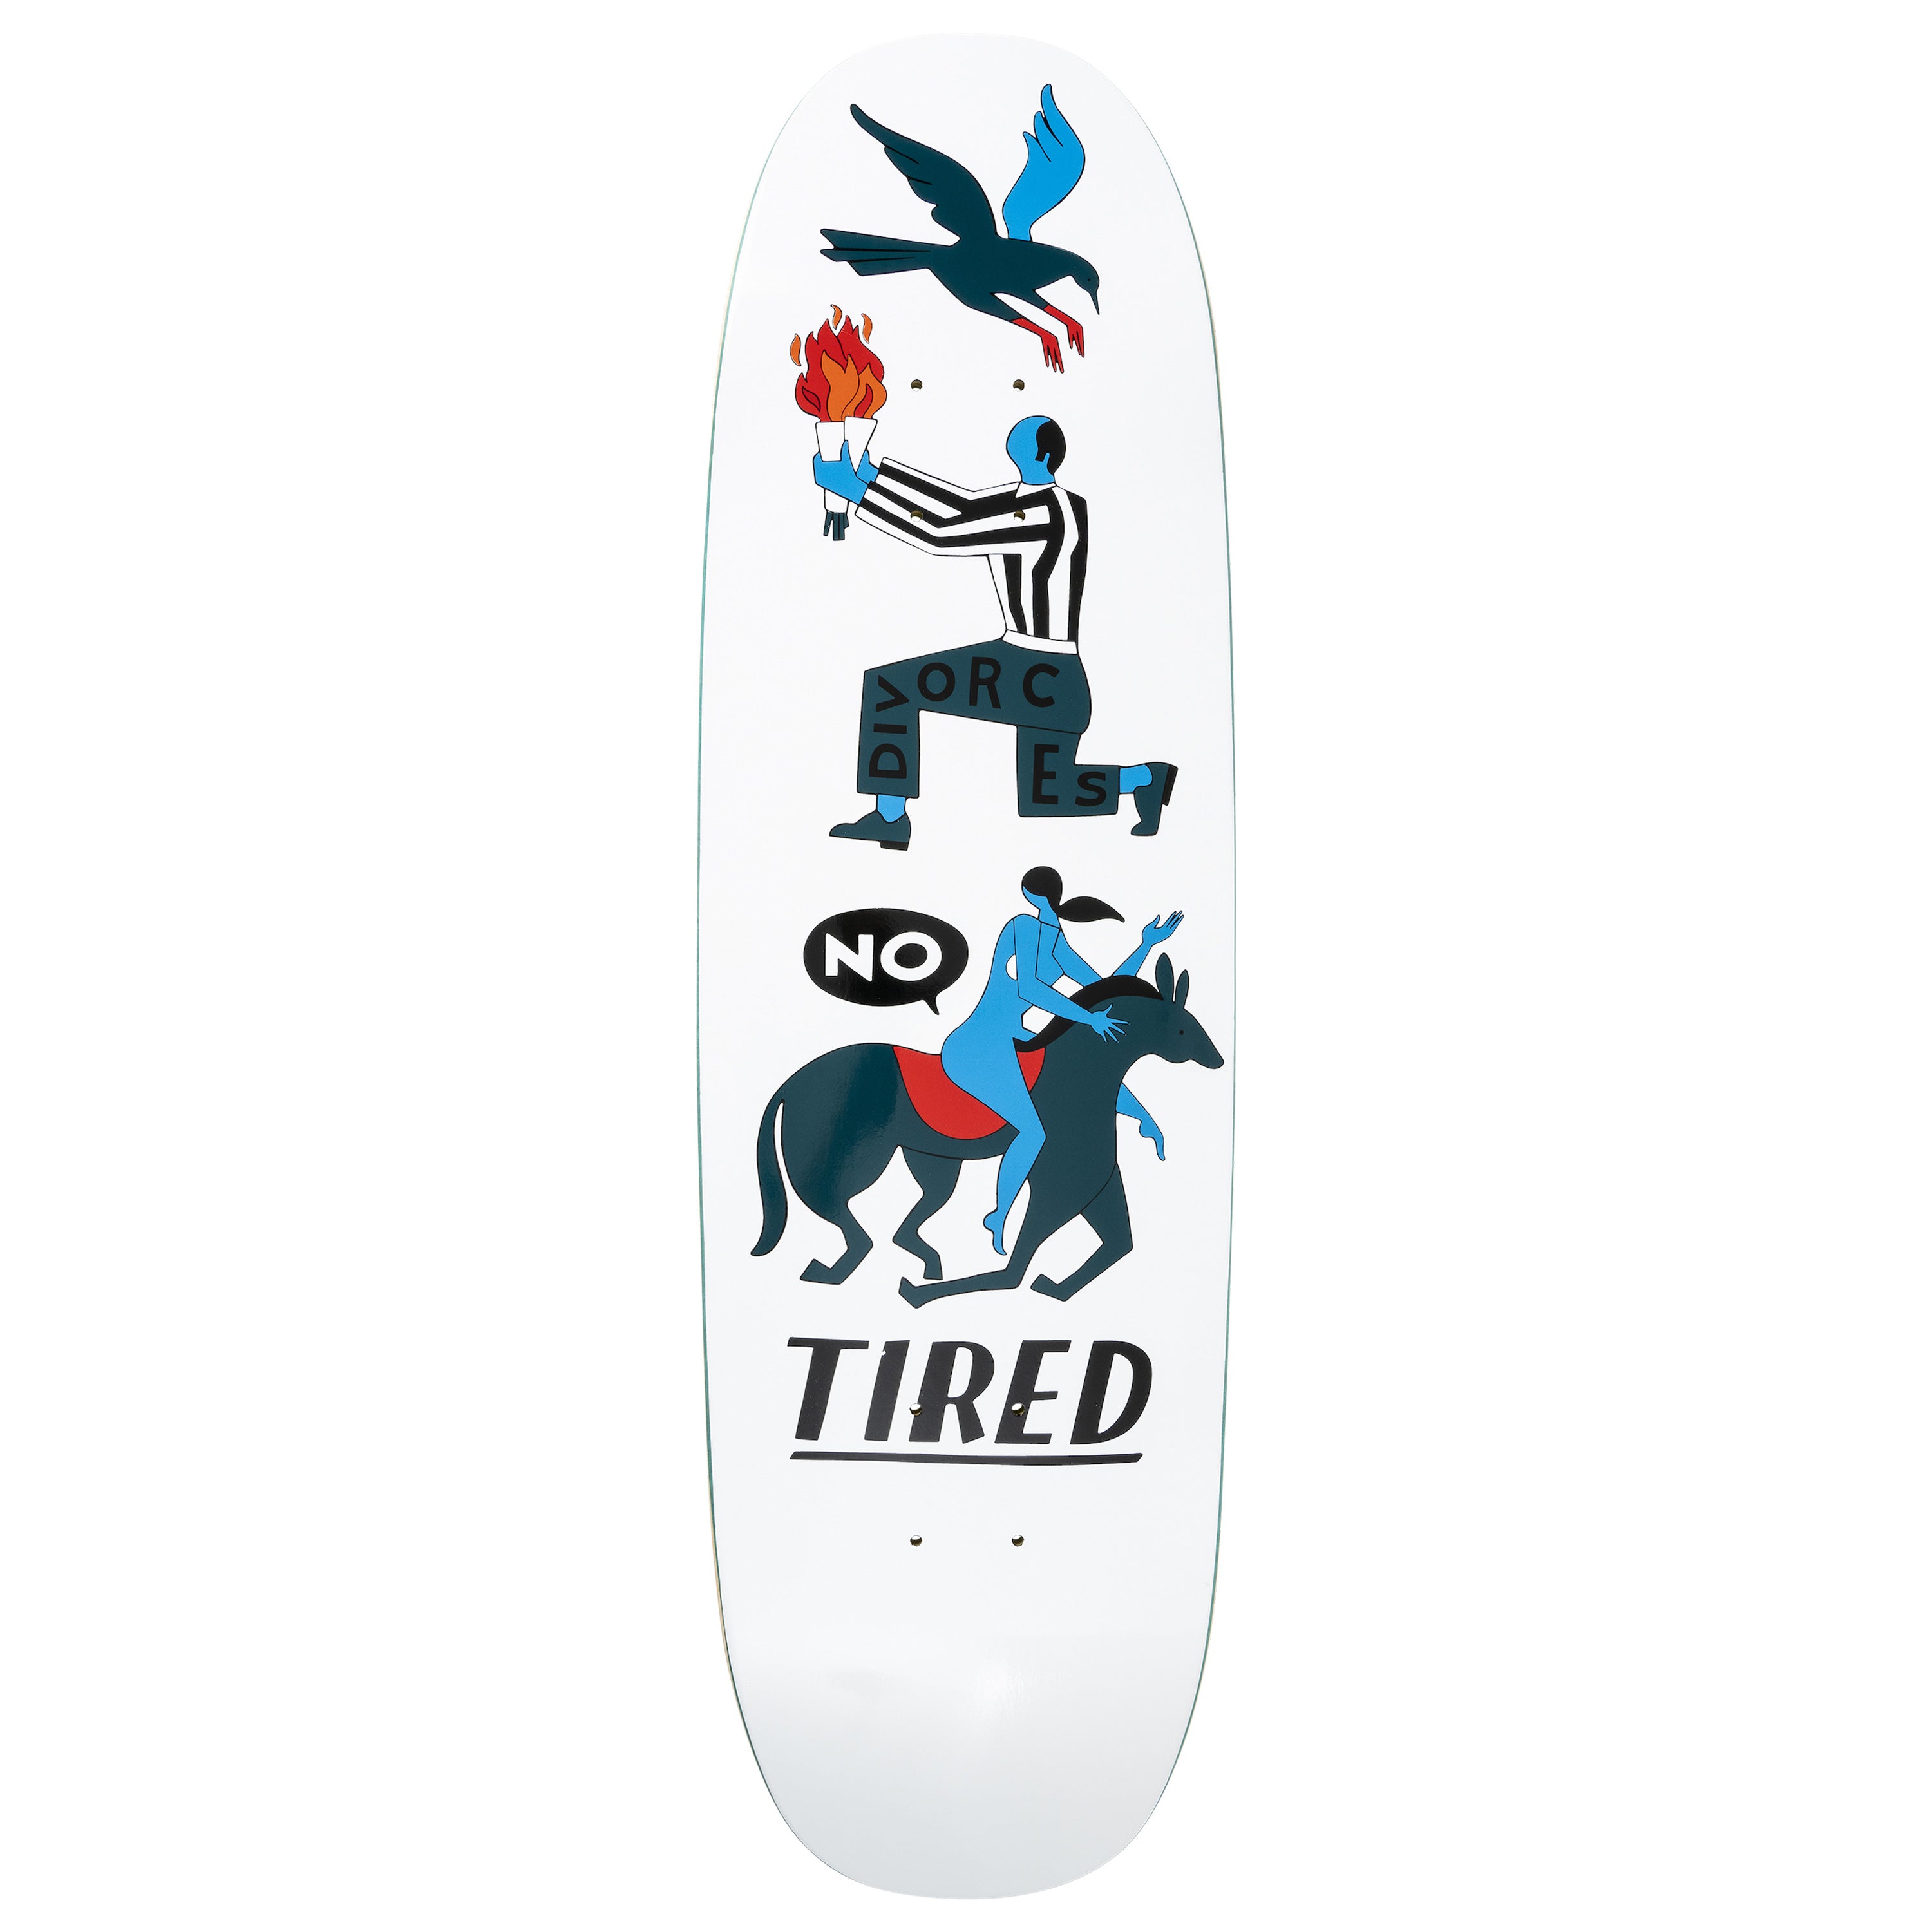 Tired Skateboards Oh Hell No Donny Deck - 8.65"